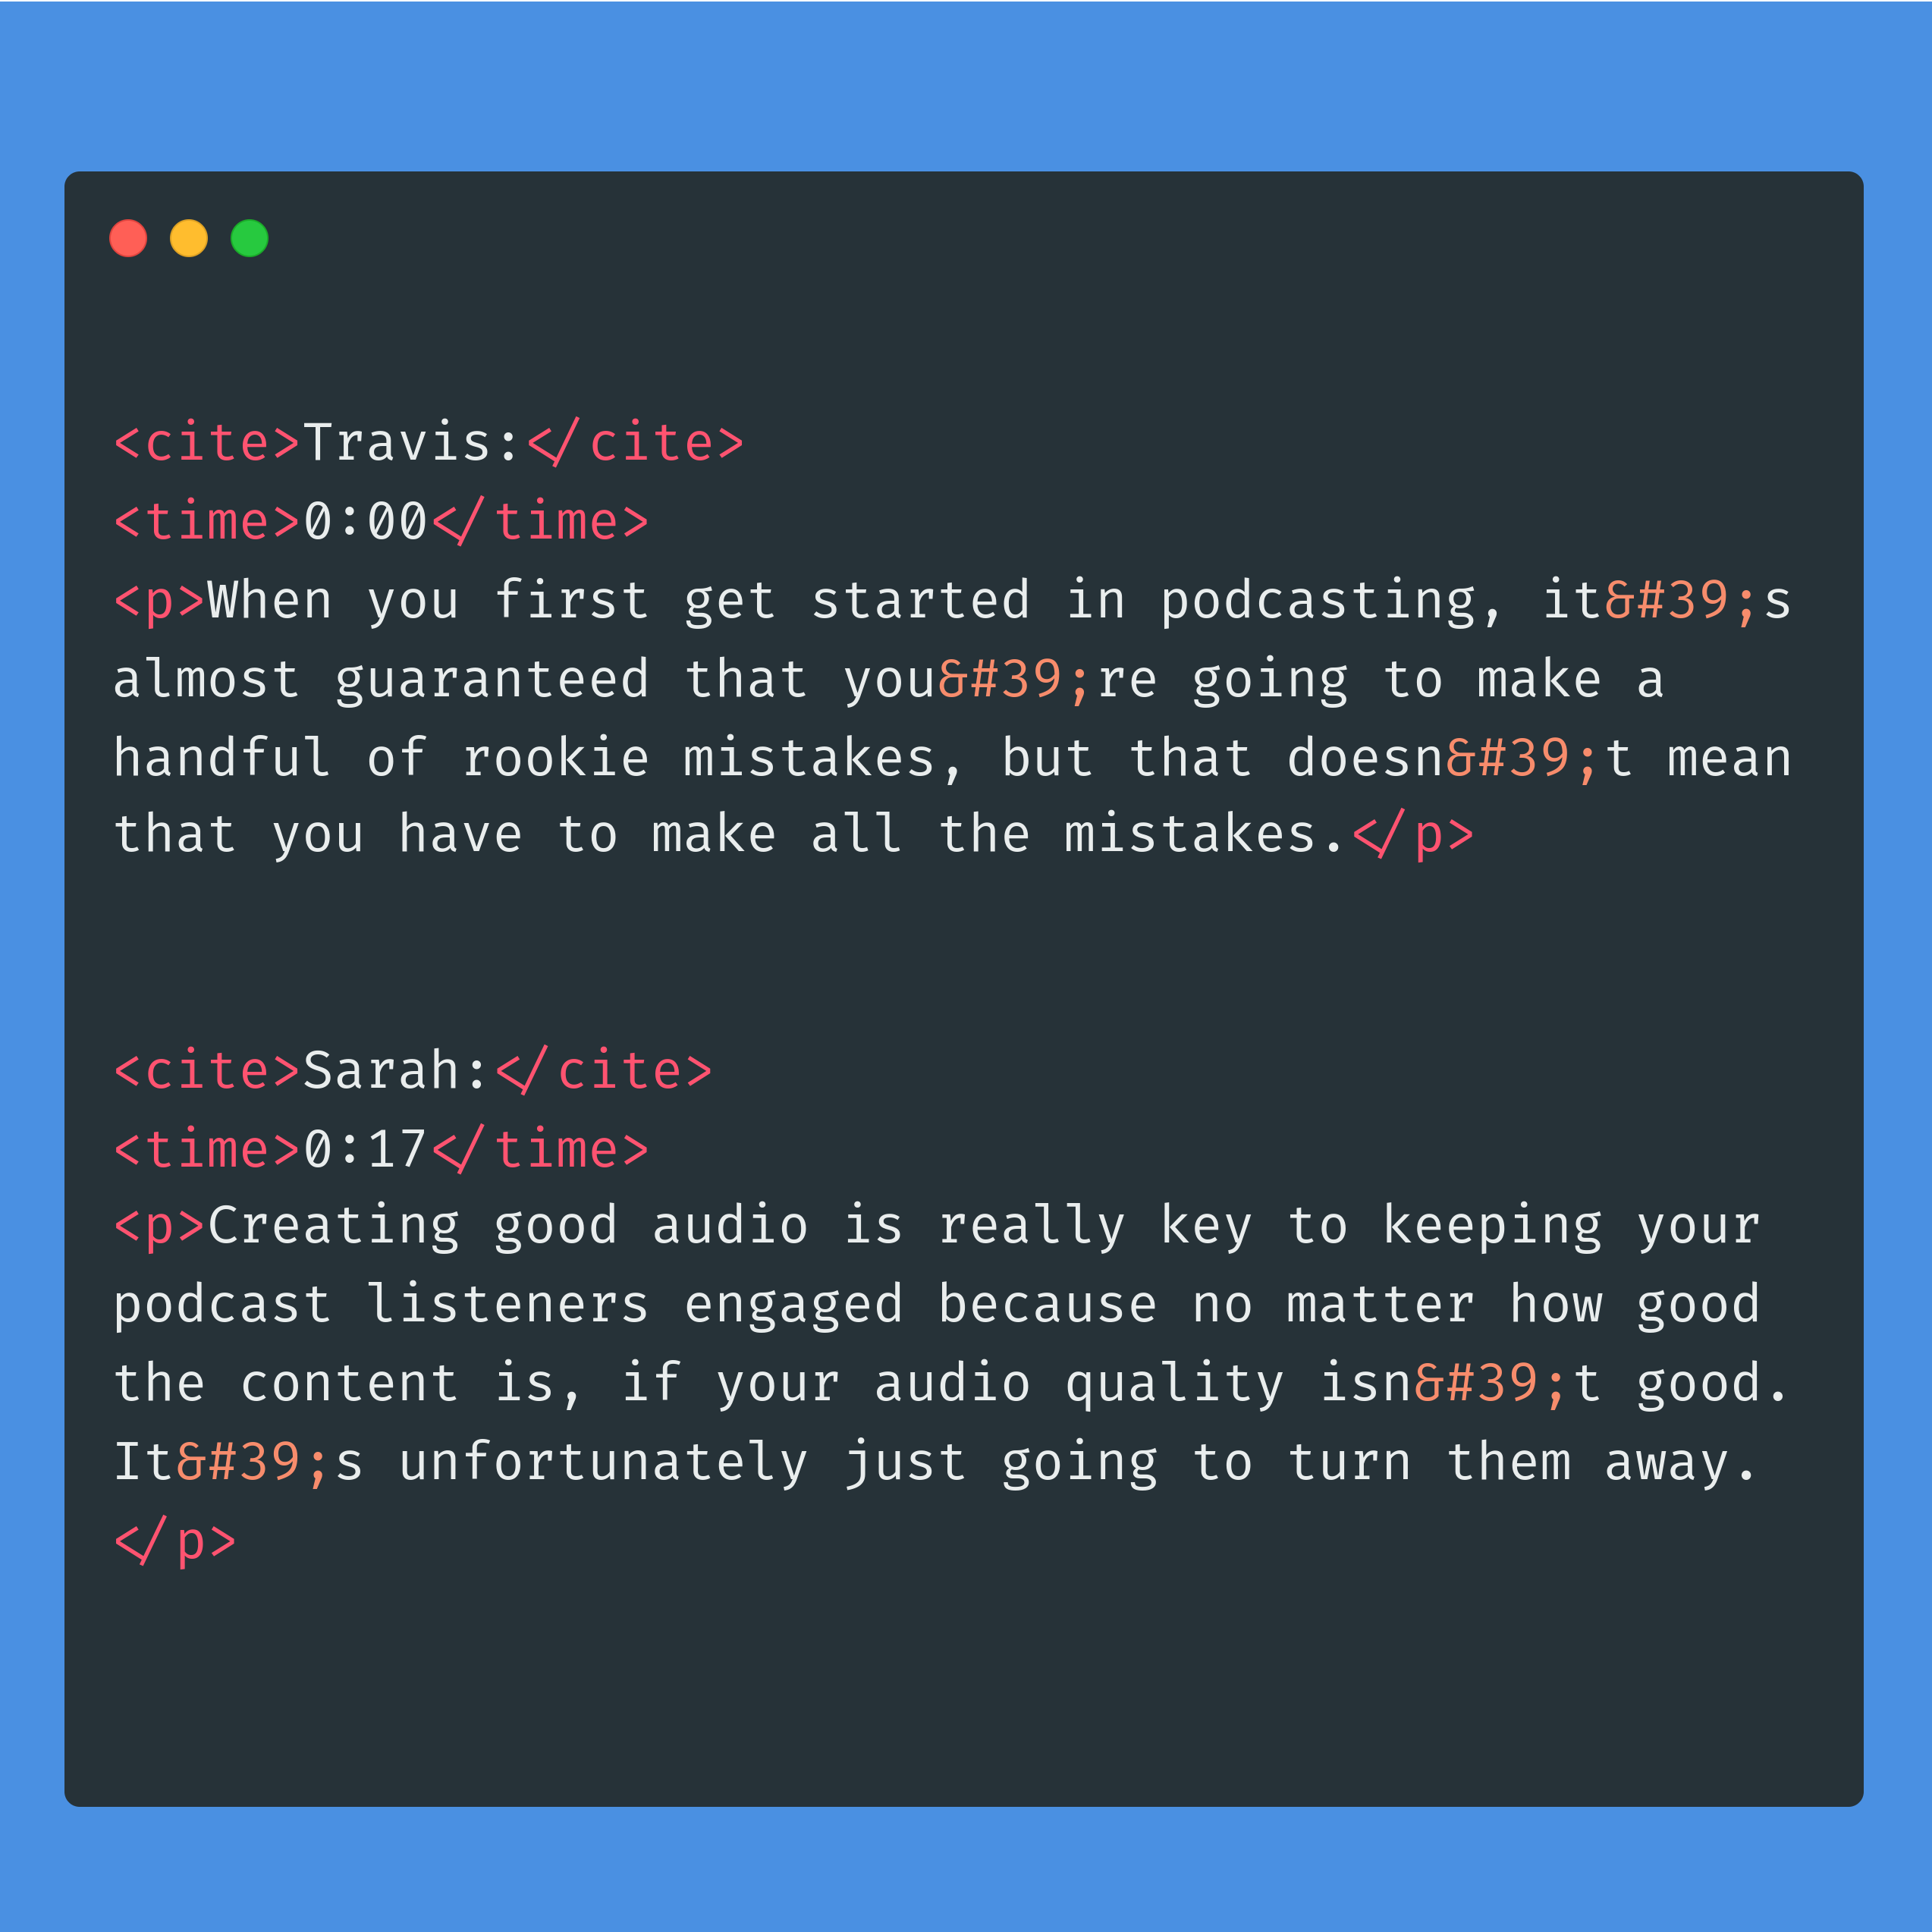 <cite>Travis:</cite><time>0:00</time><p>When you first get started in podcasting, it&#39;s almost guaranteed that you&#39;re going to make a handful of rookie mistakes, but that doesn&#39;t mean that you have to make all the mistakes.</p><cite>Sarah:</cite><time>0:17</time><p>Creating good audio is really key to keeping your podcast listeners engaged because no matter how good the content is, if your audio quality isn&#39;t good. It&#39;s unfortunately just going to turn them away.</p>